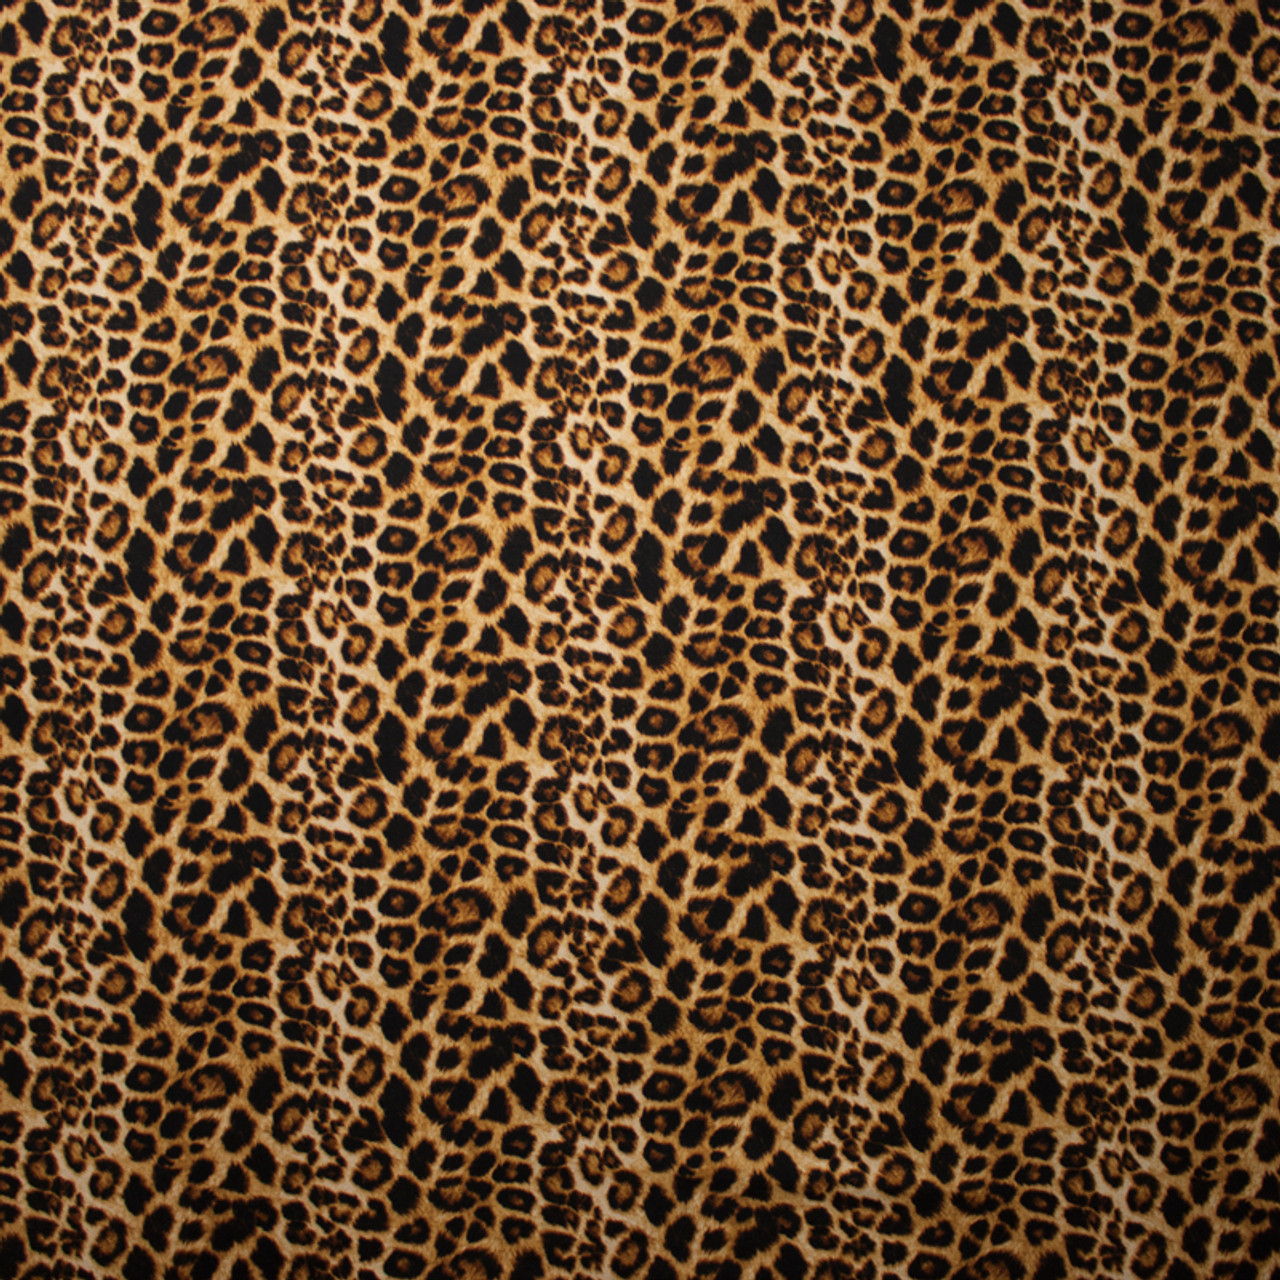 Brown Leopard Rose Gold Metallic DBP Print #425 Double Brushed Polyester Spandex Apparel Stretch Fabric 190 GSM 58-60 Wide By The Yard